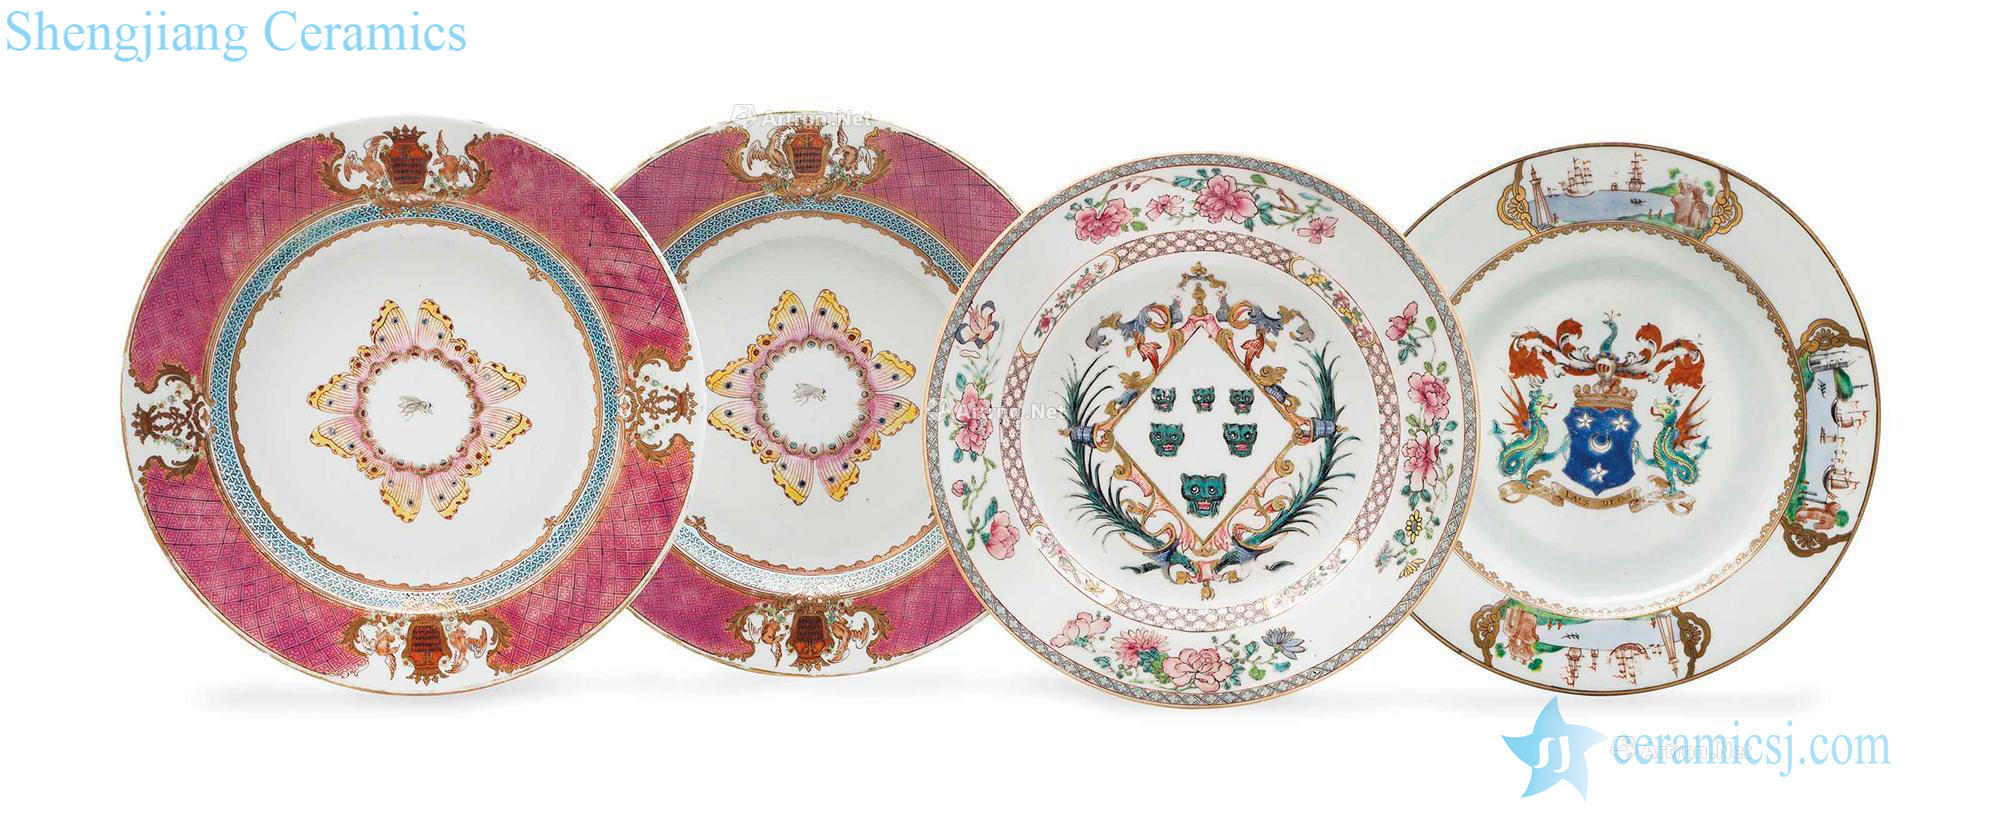 Yongzheng and qianlong period, 1730-45. A GROUP OF FAMILLE ROSE ARMORIAL PLATES